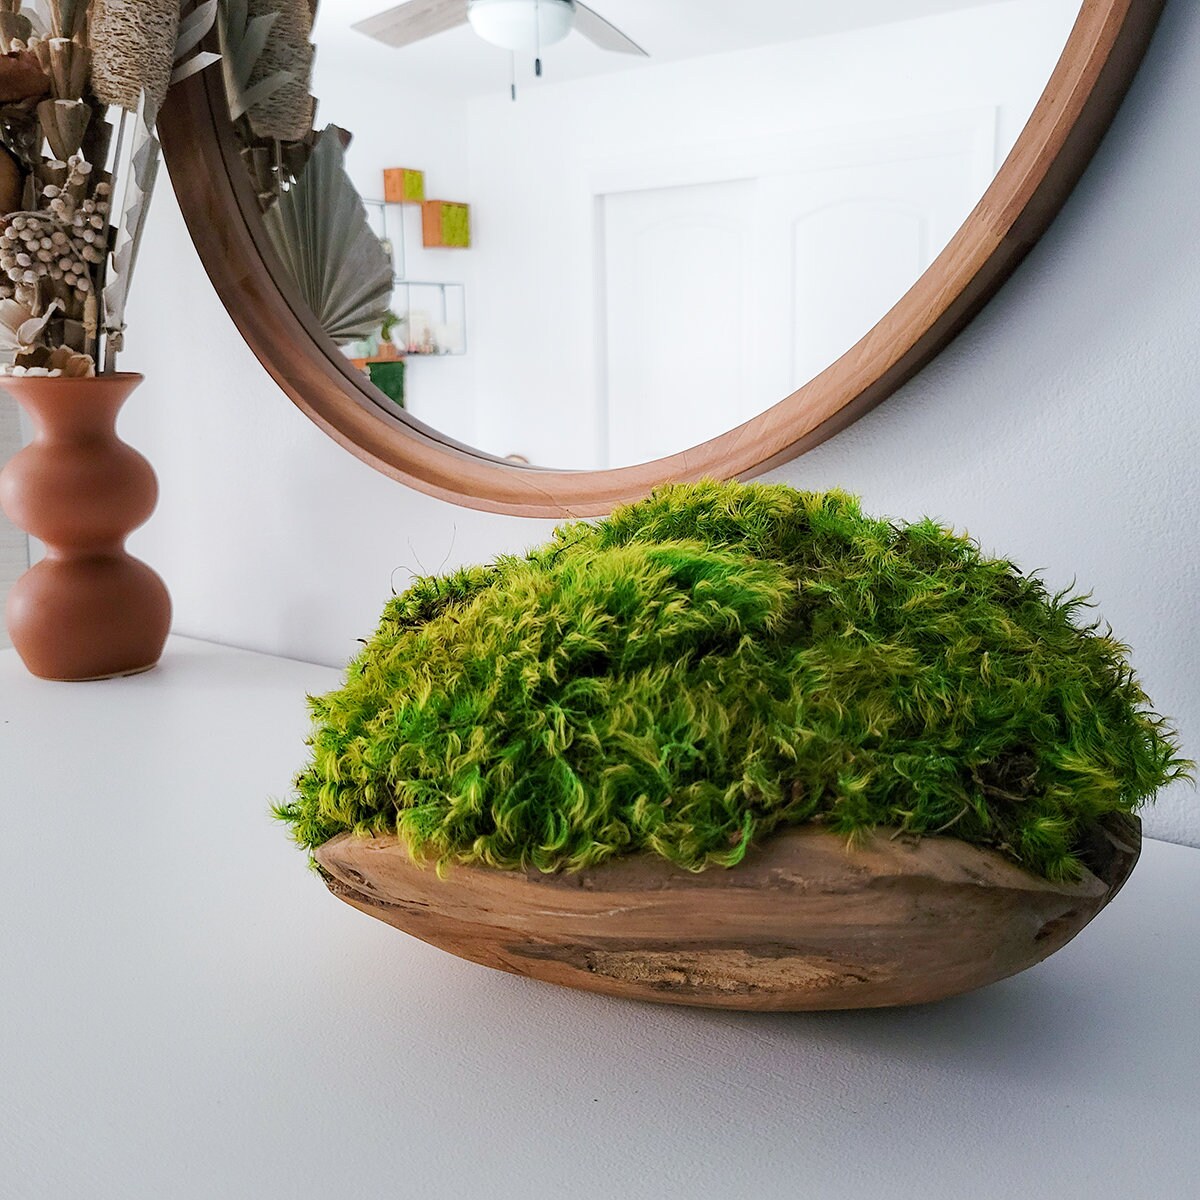 Moss Bowl Centerpiece | Wooden Bowl w preserved mood moss | Natural Decor | Coffee Table Decor |  Modern Comtempororay Decoration | Design